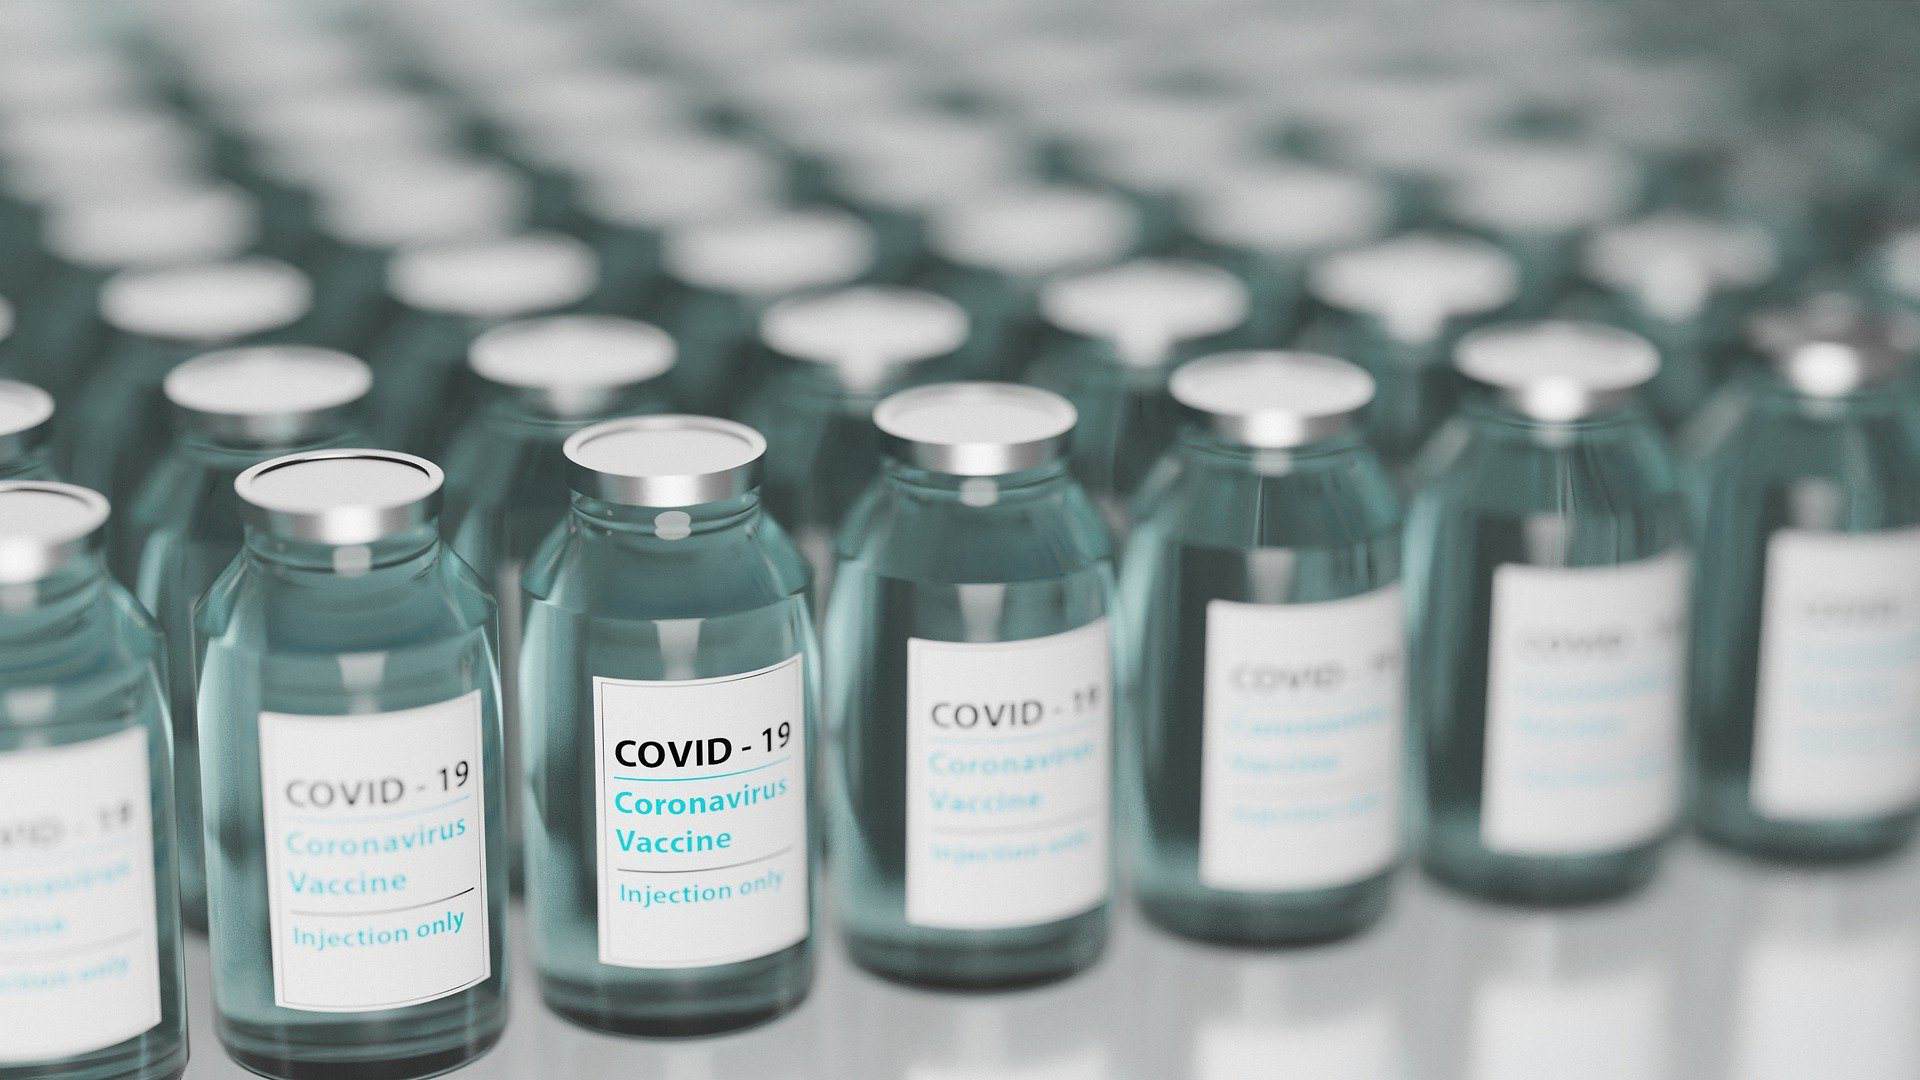 87% of Americans Want to Receive COVID-19 Vaccine Information From Their Providers